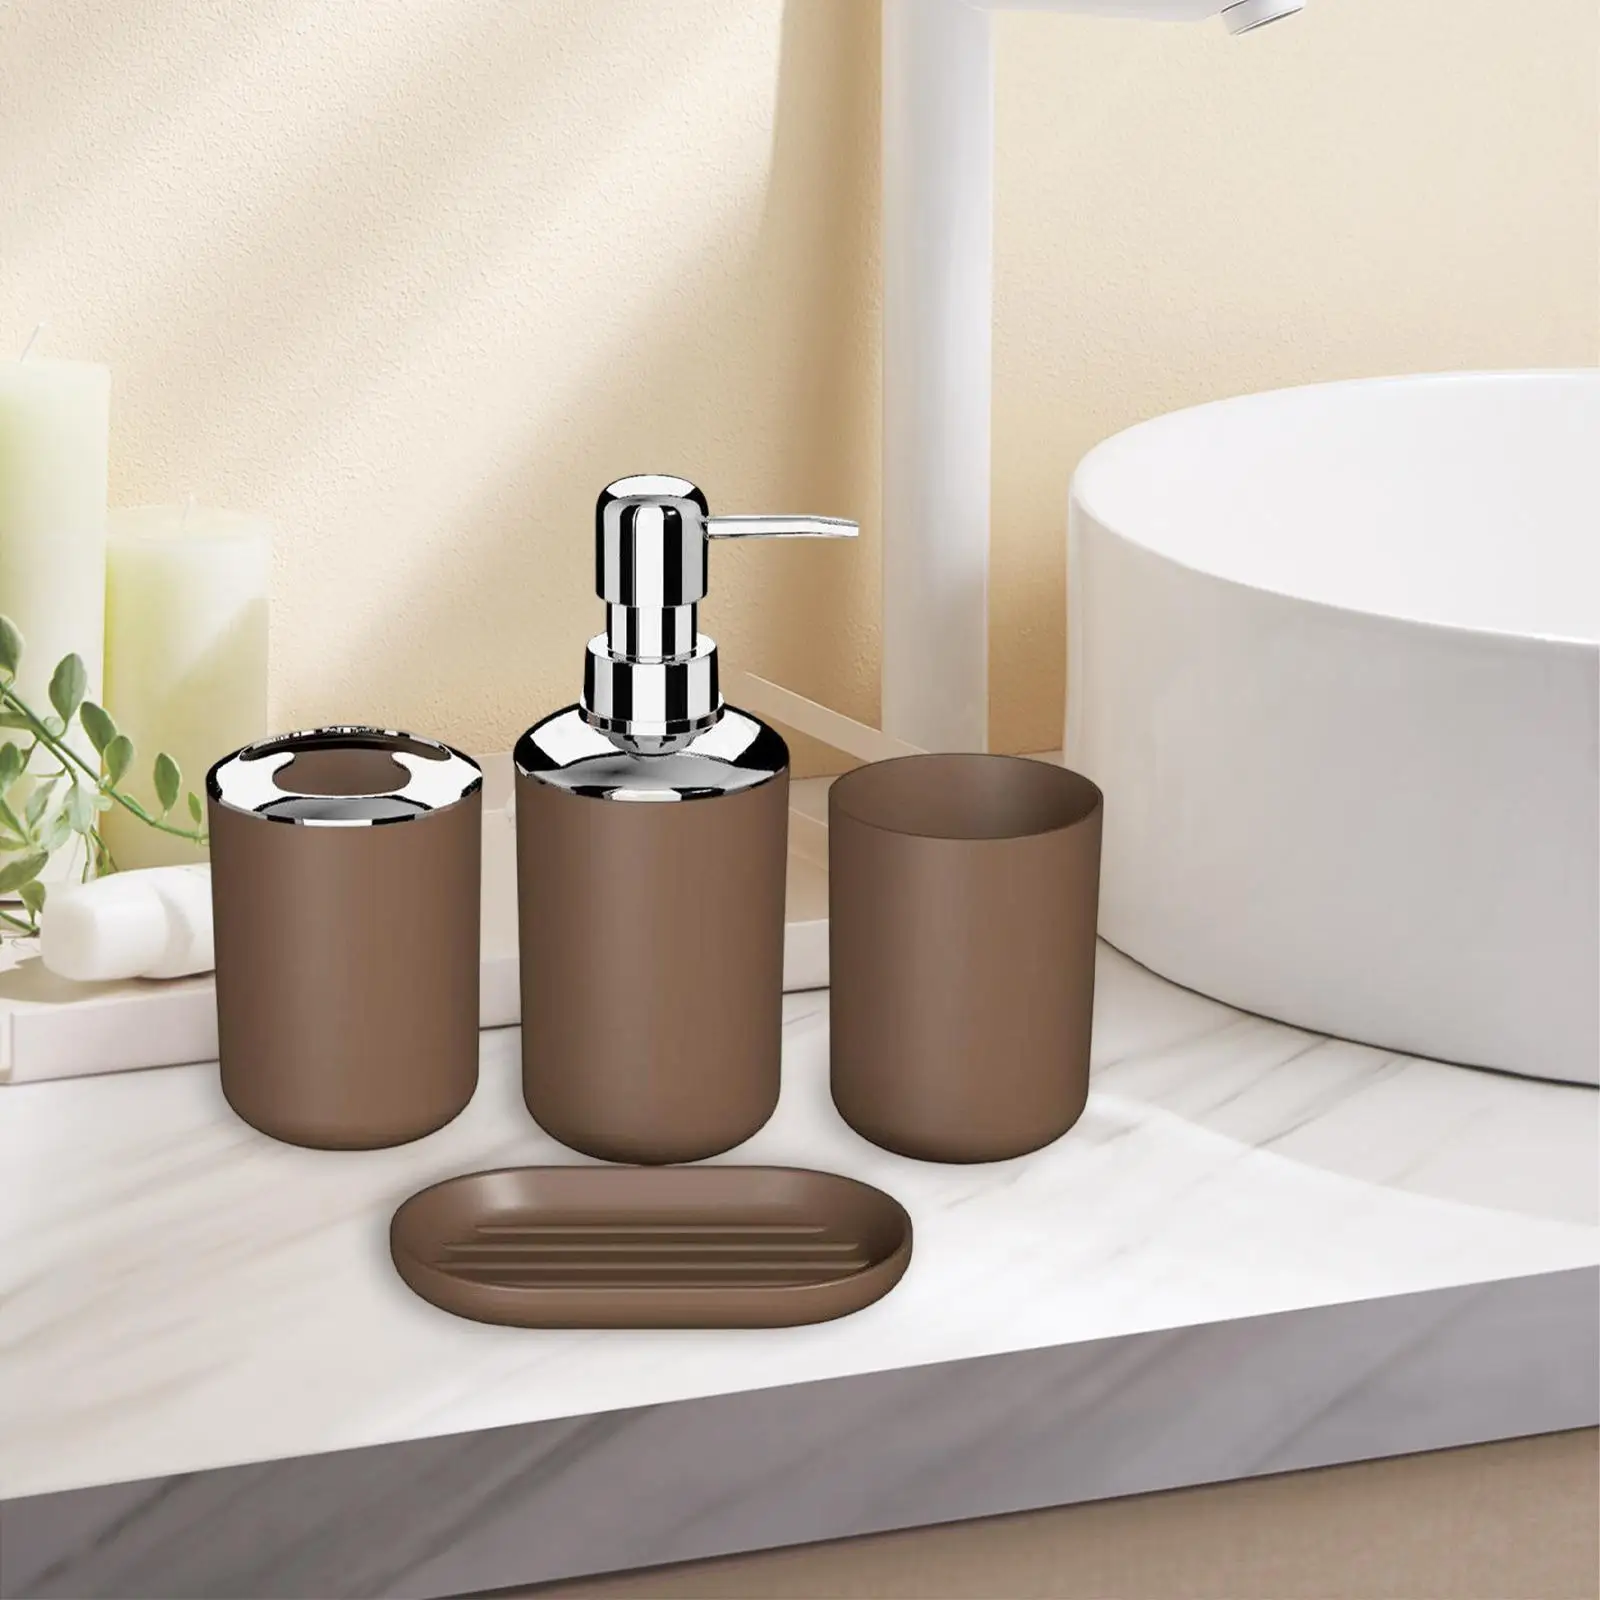 4x Bathroom Accessories Set & Tumbler & Toothbrush Holder Countertop Decor Neat & Soap Dish for Apartment Office Buildings Homes